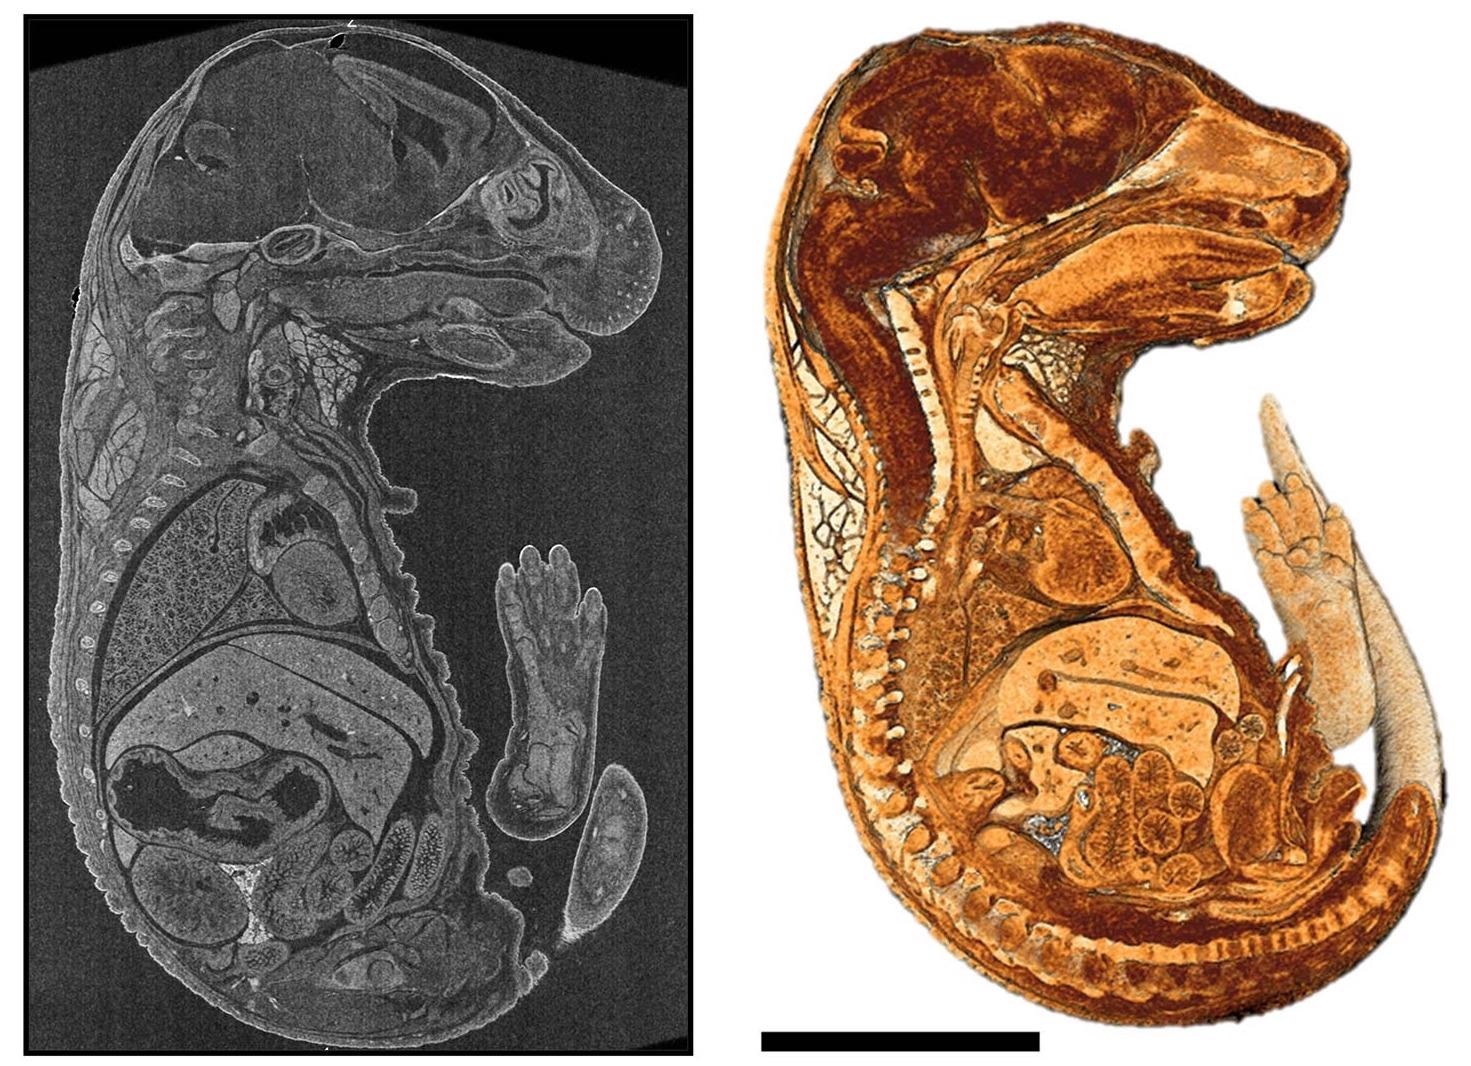 2D virtual cross-section and a cutaway view of 3D rendering of a mouse embryo embedded in paraffin.